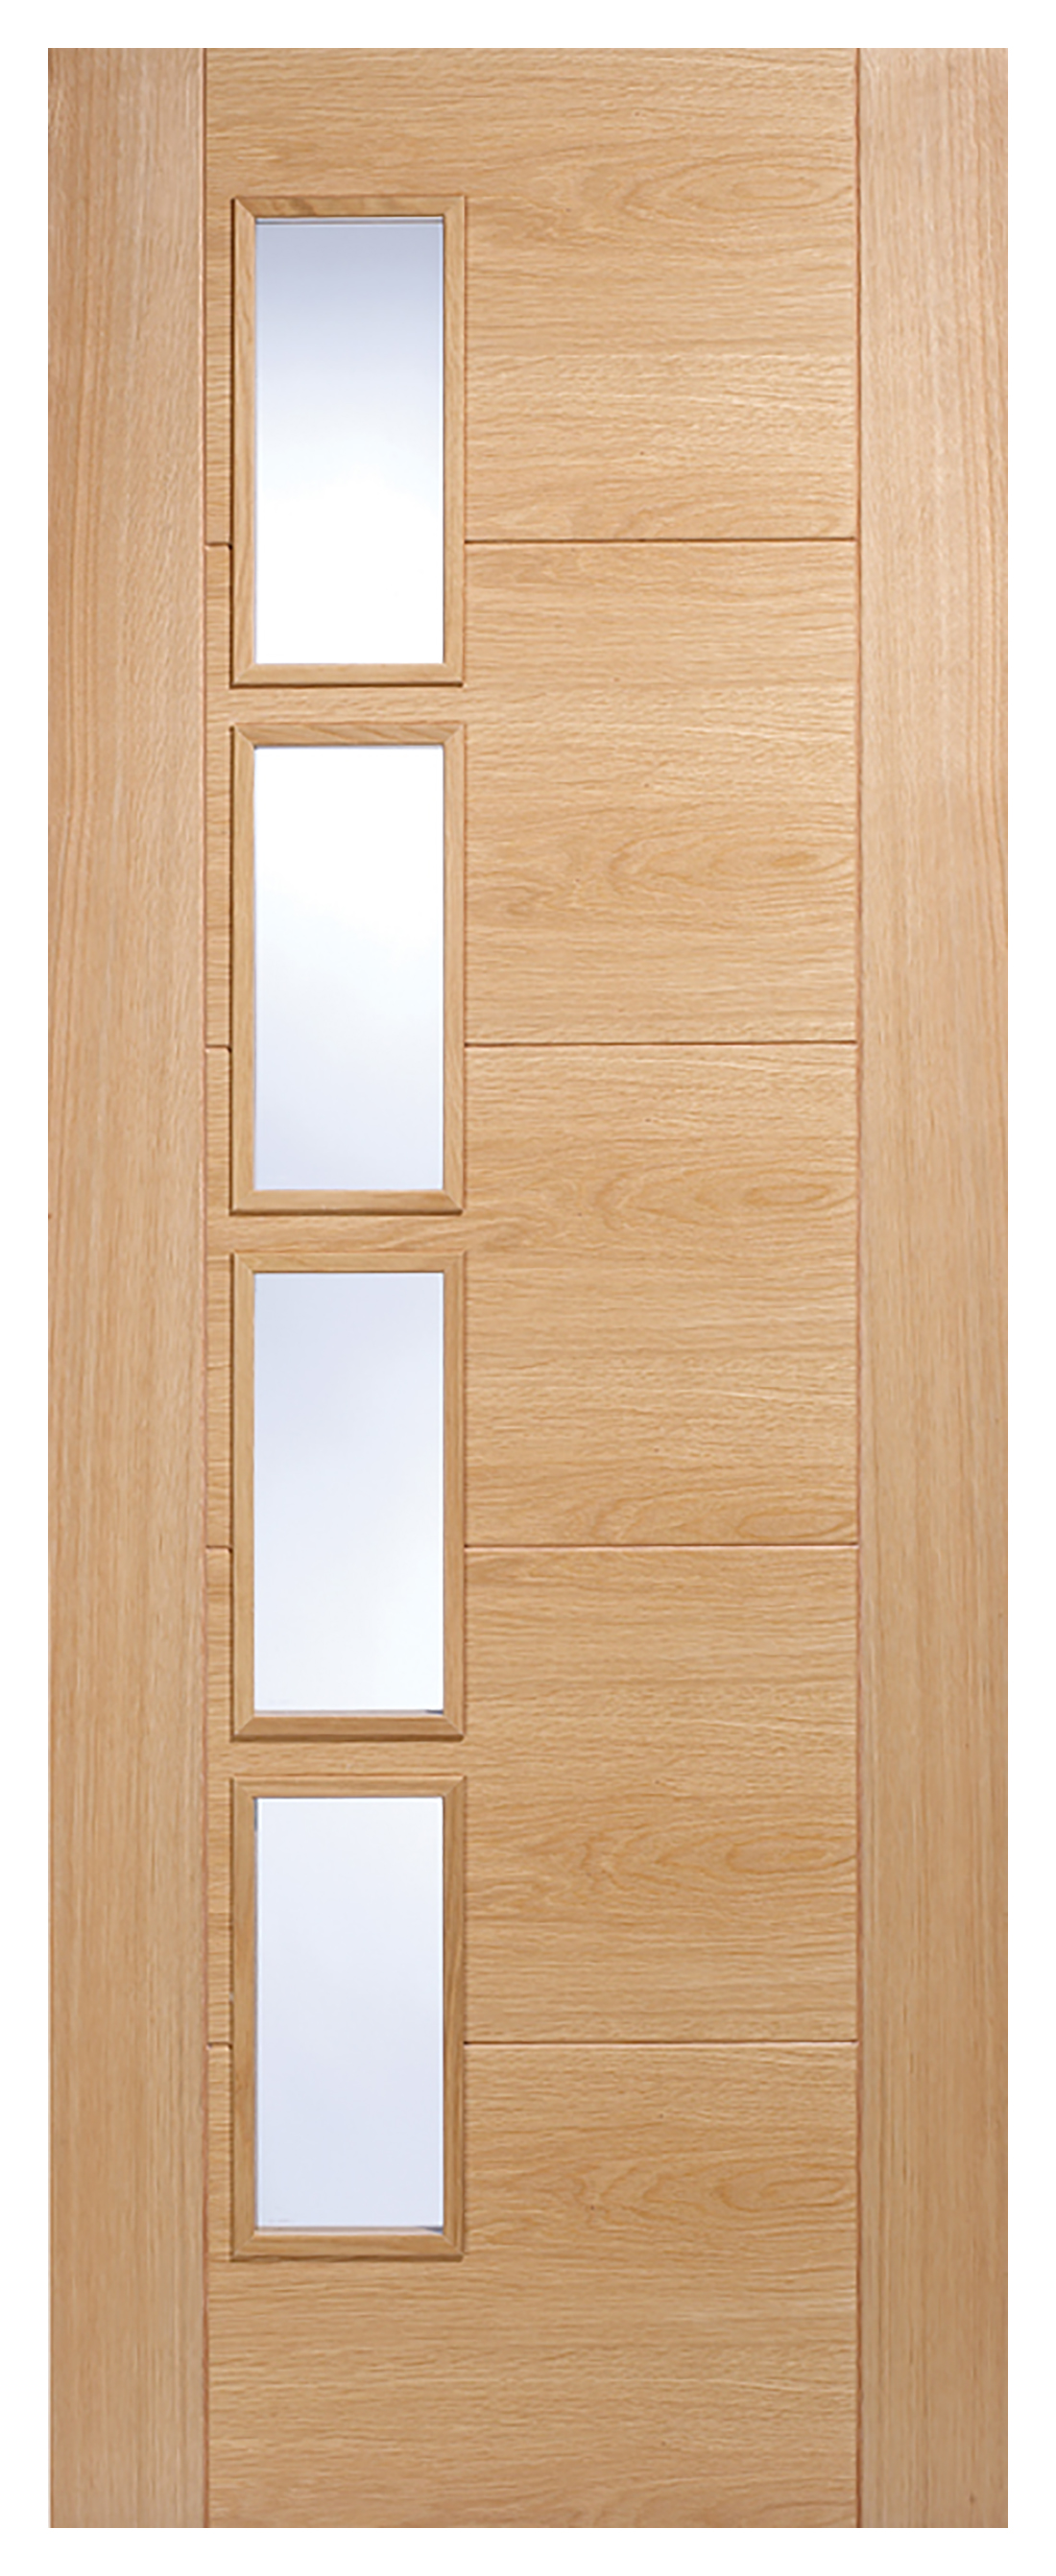 Image of LPD Internal Vancouver 4 Lite Offset Pre-Finished Oak Solid Core Door - 726 x 2040mm